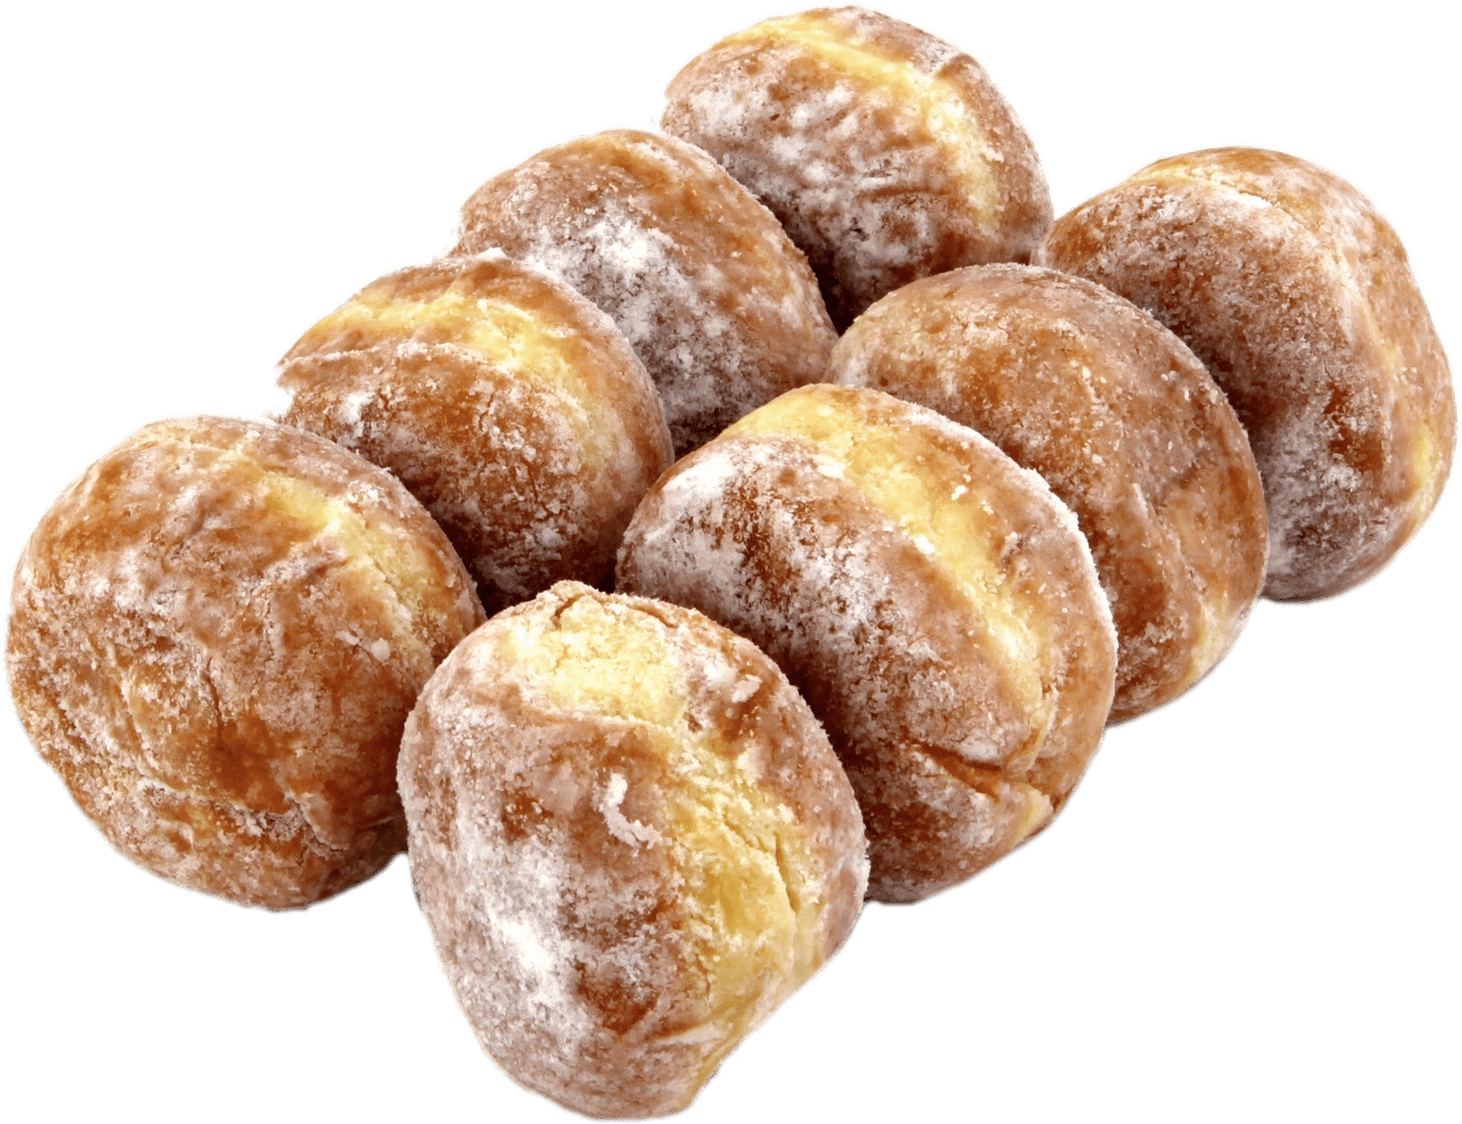 A Group Of Donuts With Powdered Sugar